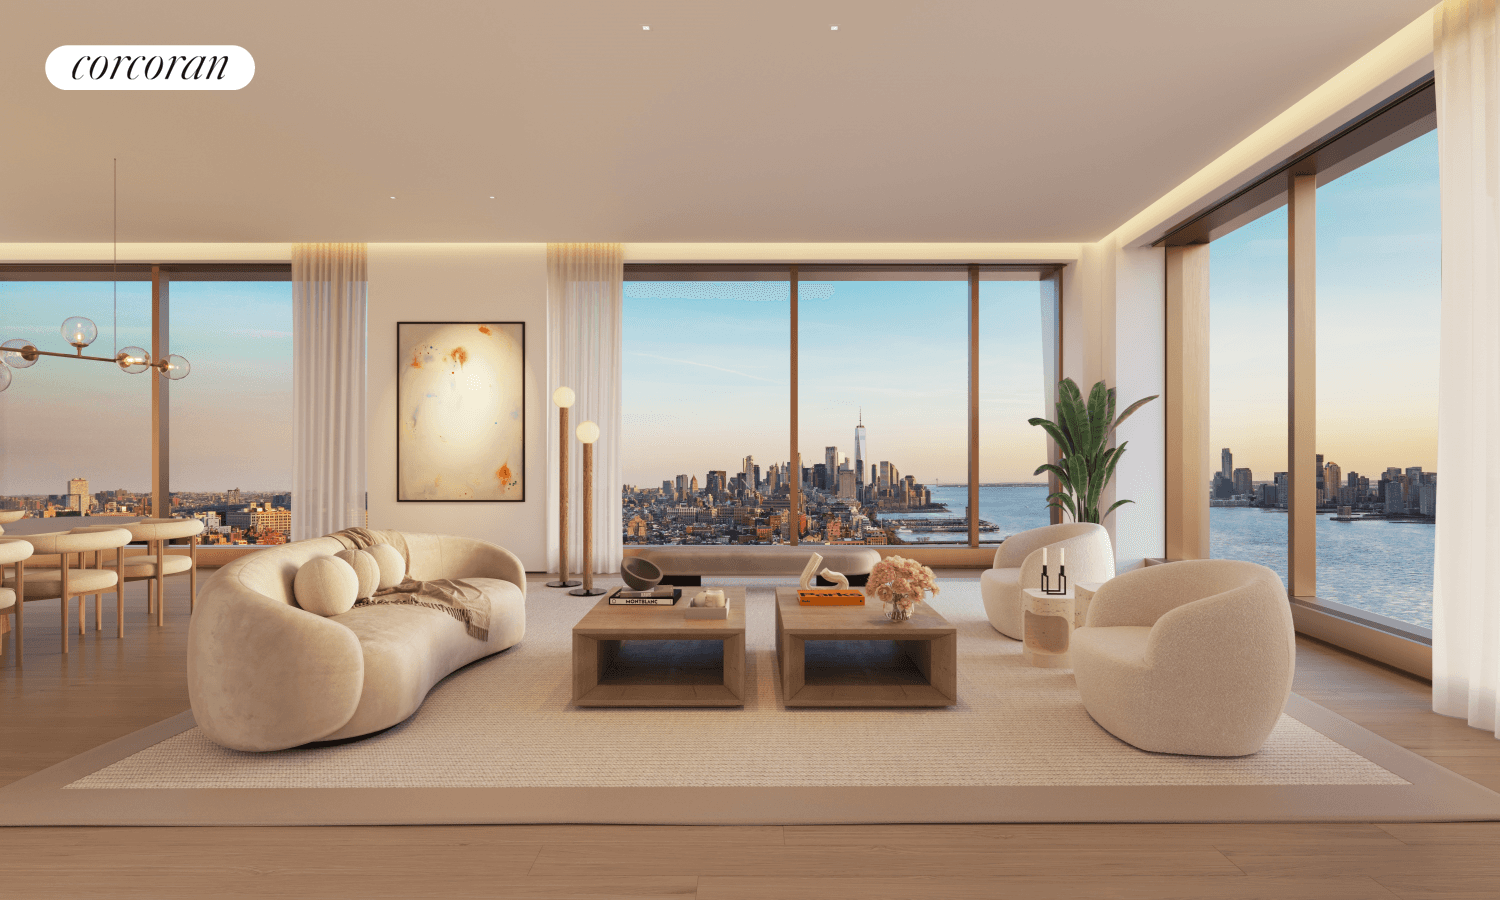 Penthouse W32A is a 5, 663 SF half floor five bedroom and five and a half bathroom residence curated by Gabellini Sheppard Associates.